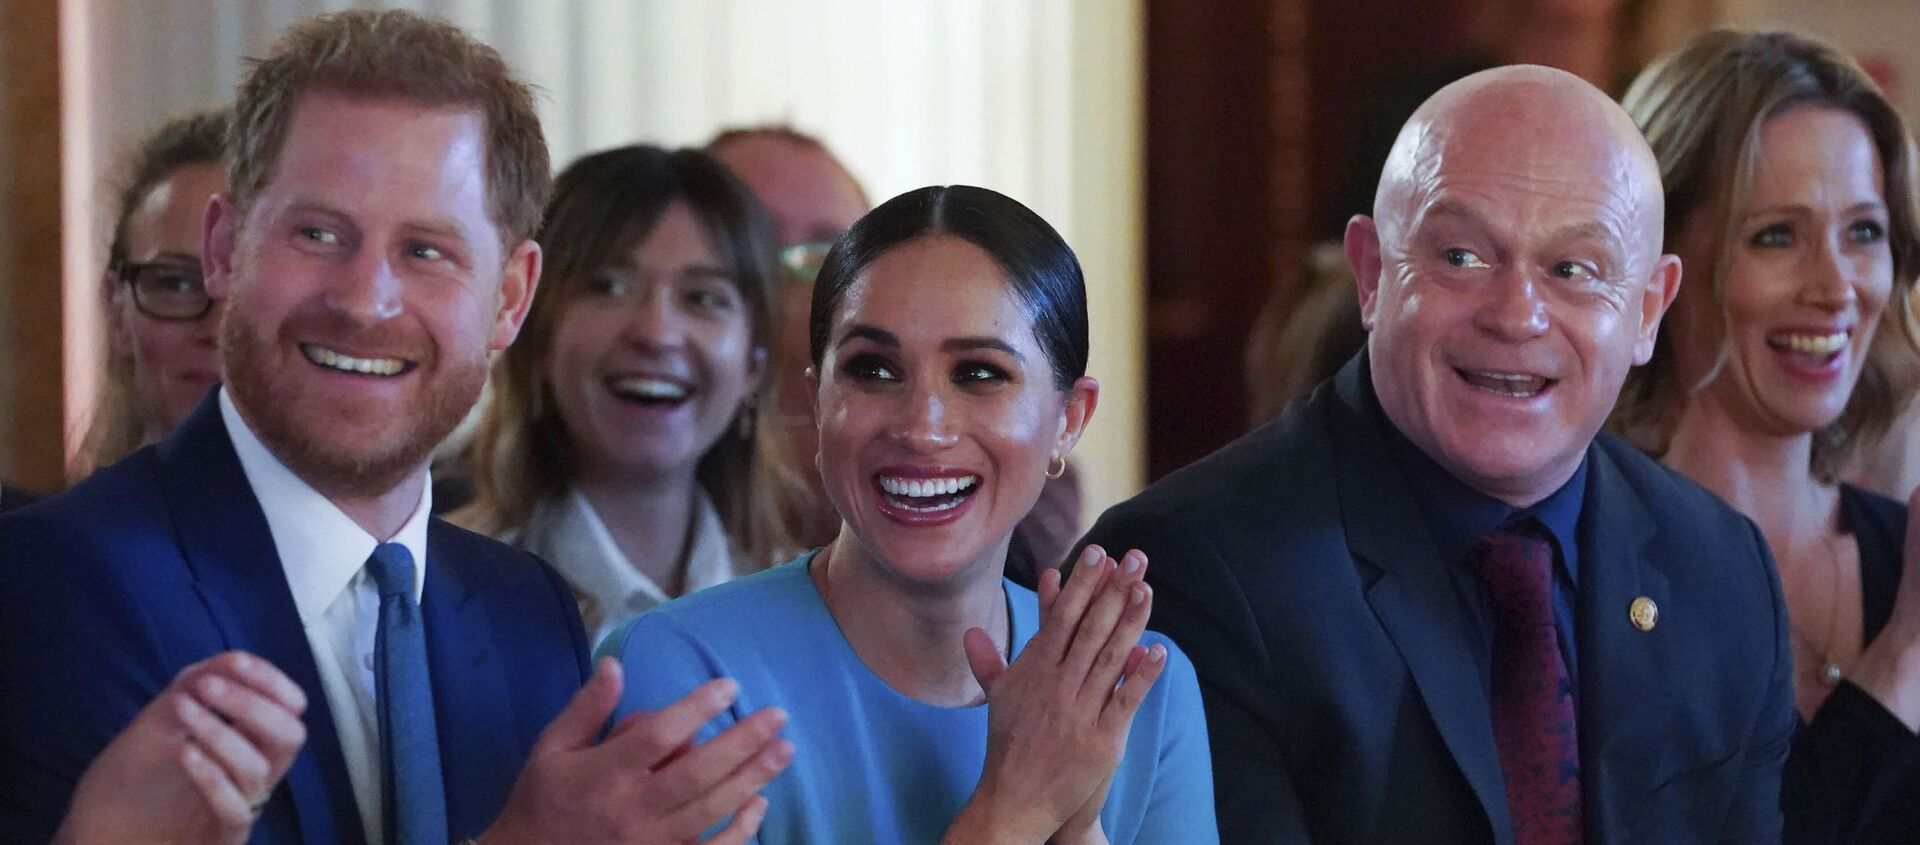 Britain's Prince Harry and Meghan, the Duchess of Sussex, cheer during a marriage proposal at the Endeavour Fund Awards at Mansion House in London, Thursday, March 5, 2020 - Sputnik International, 1920, 29.10.2020